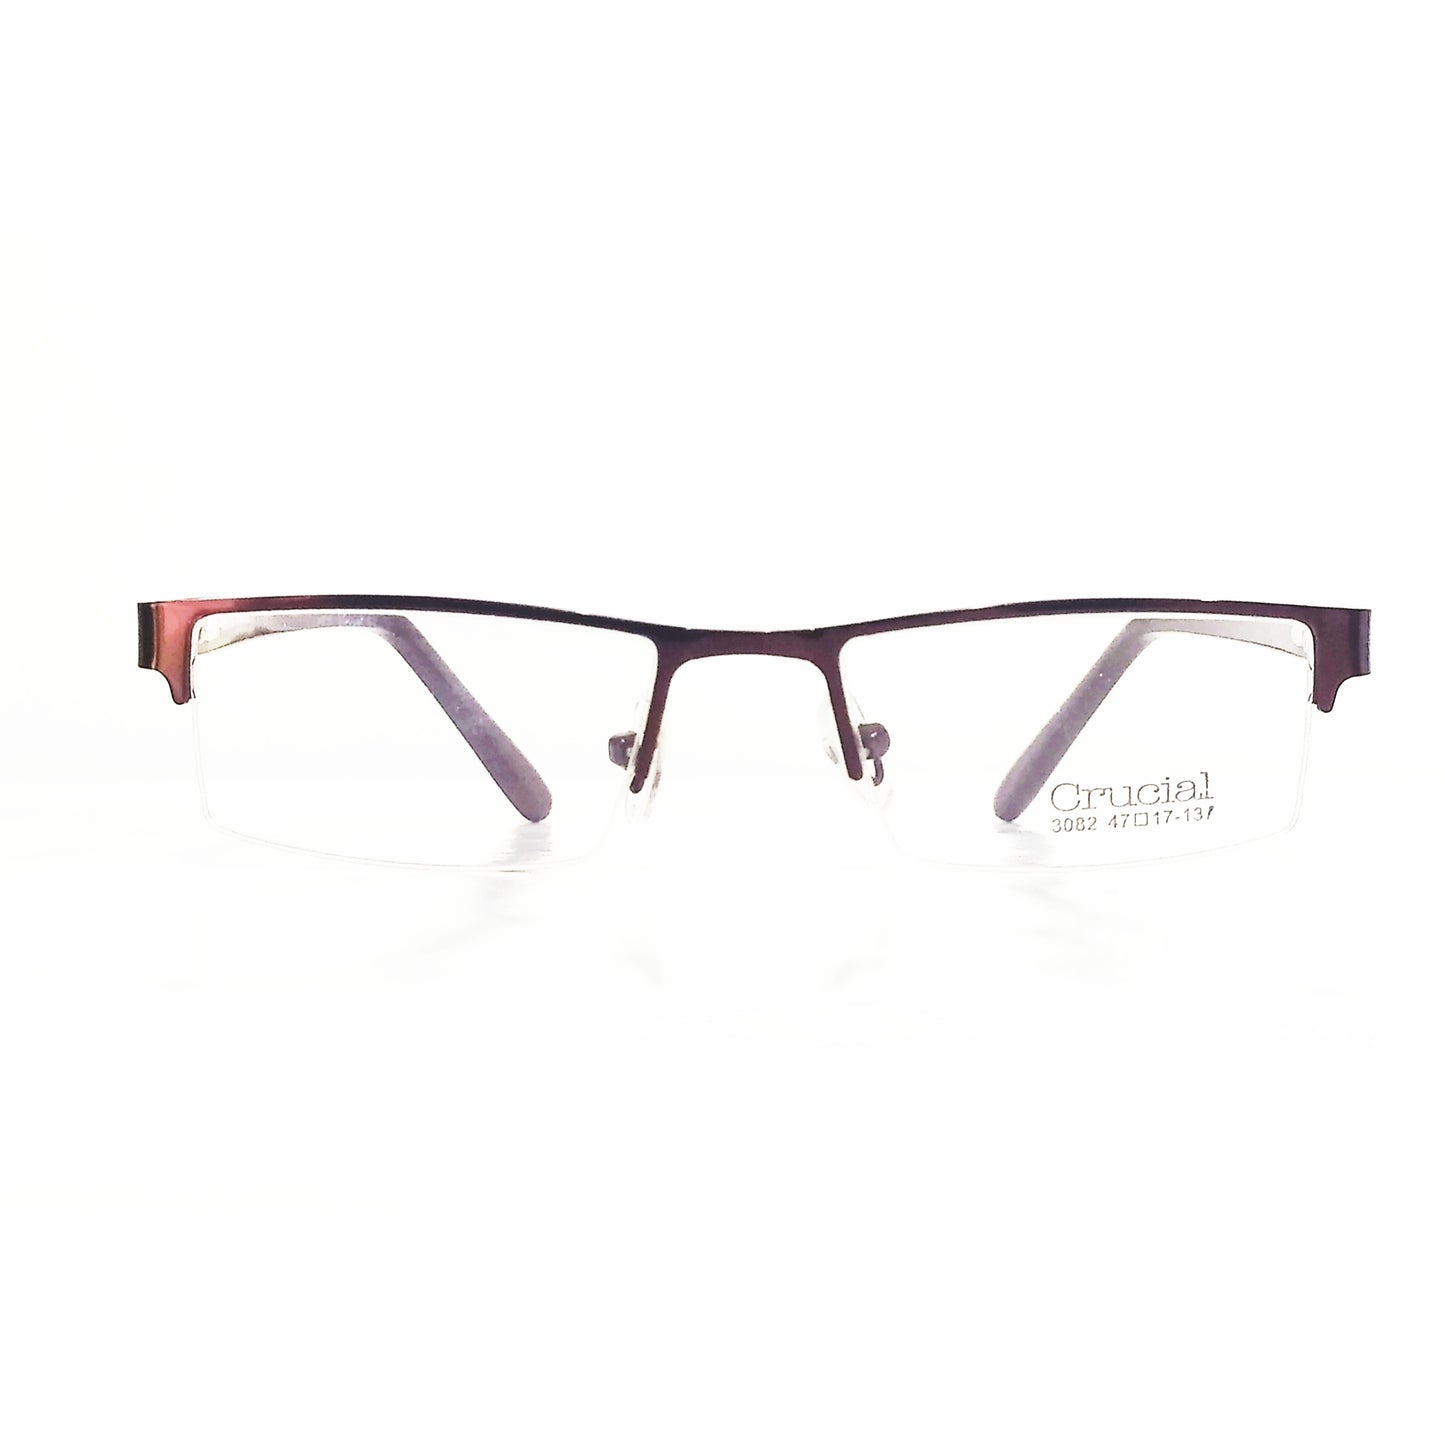 Copper Metal Supra Spectacle Frame Glasses For Women and Men